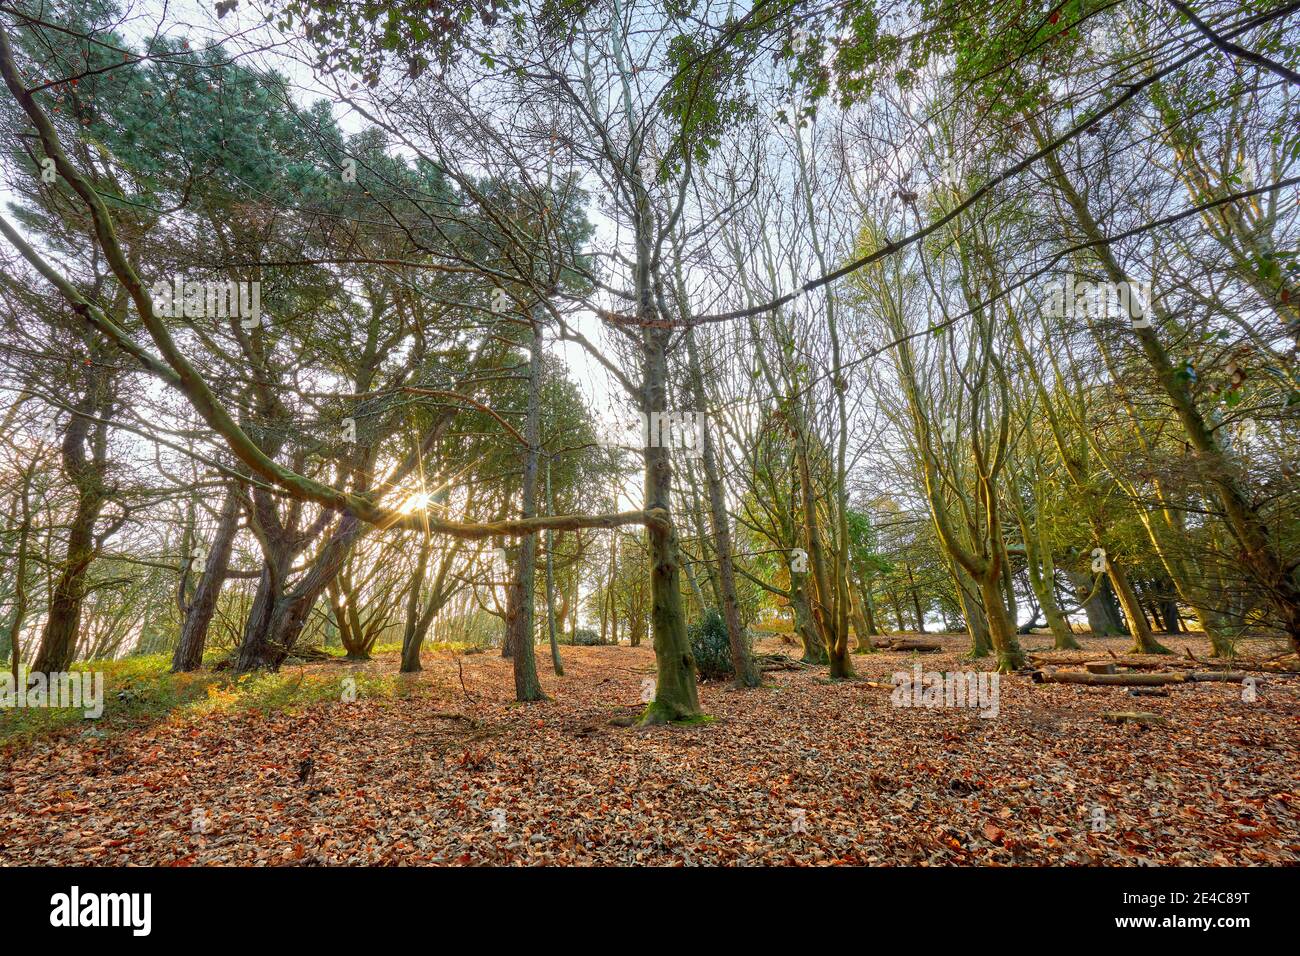 Image of sunlight through the trees in a woodland in the winter with leaves on the ground. Jersey, Channel Islands Stock Photo